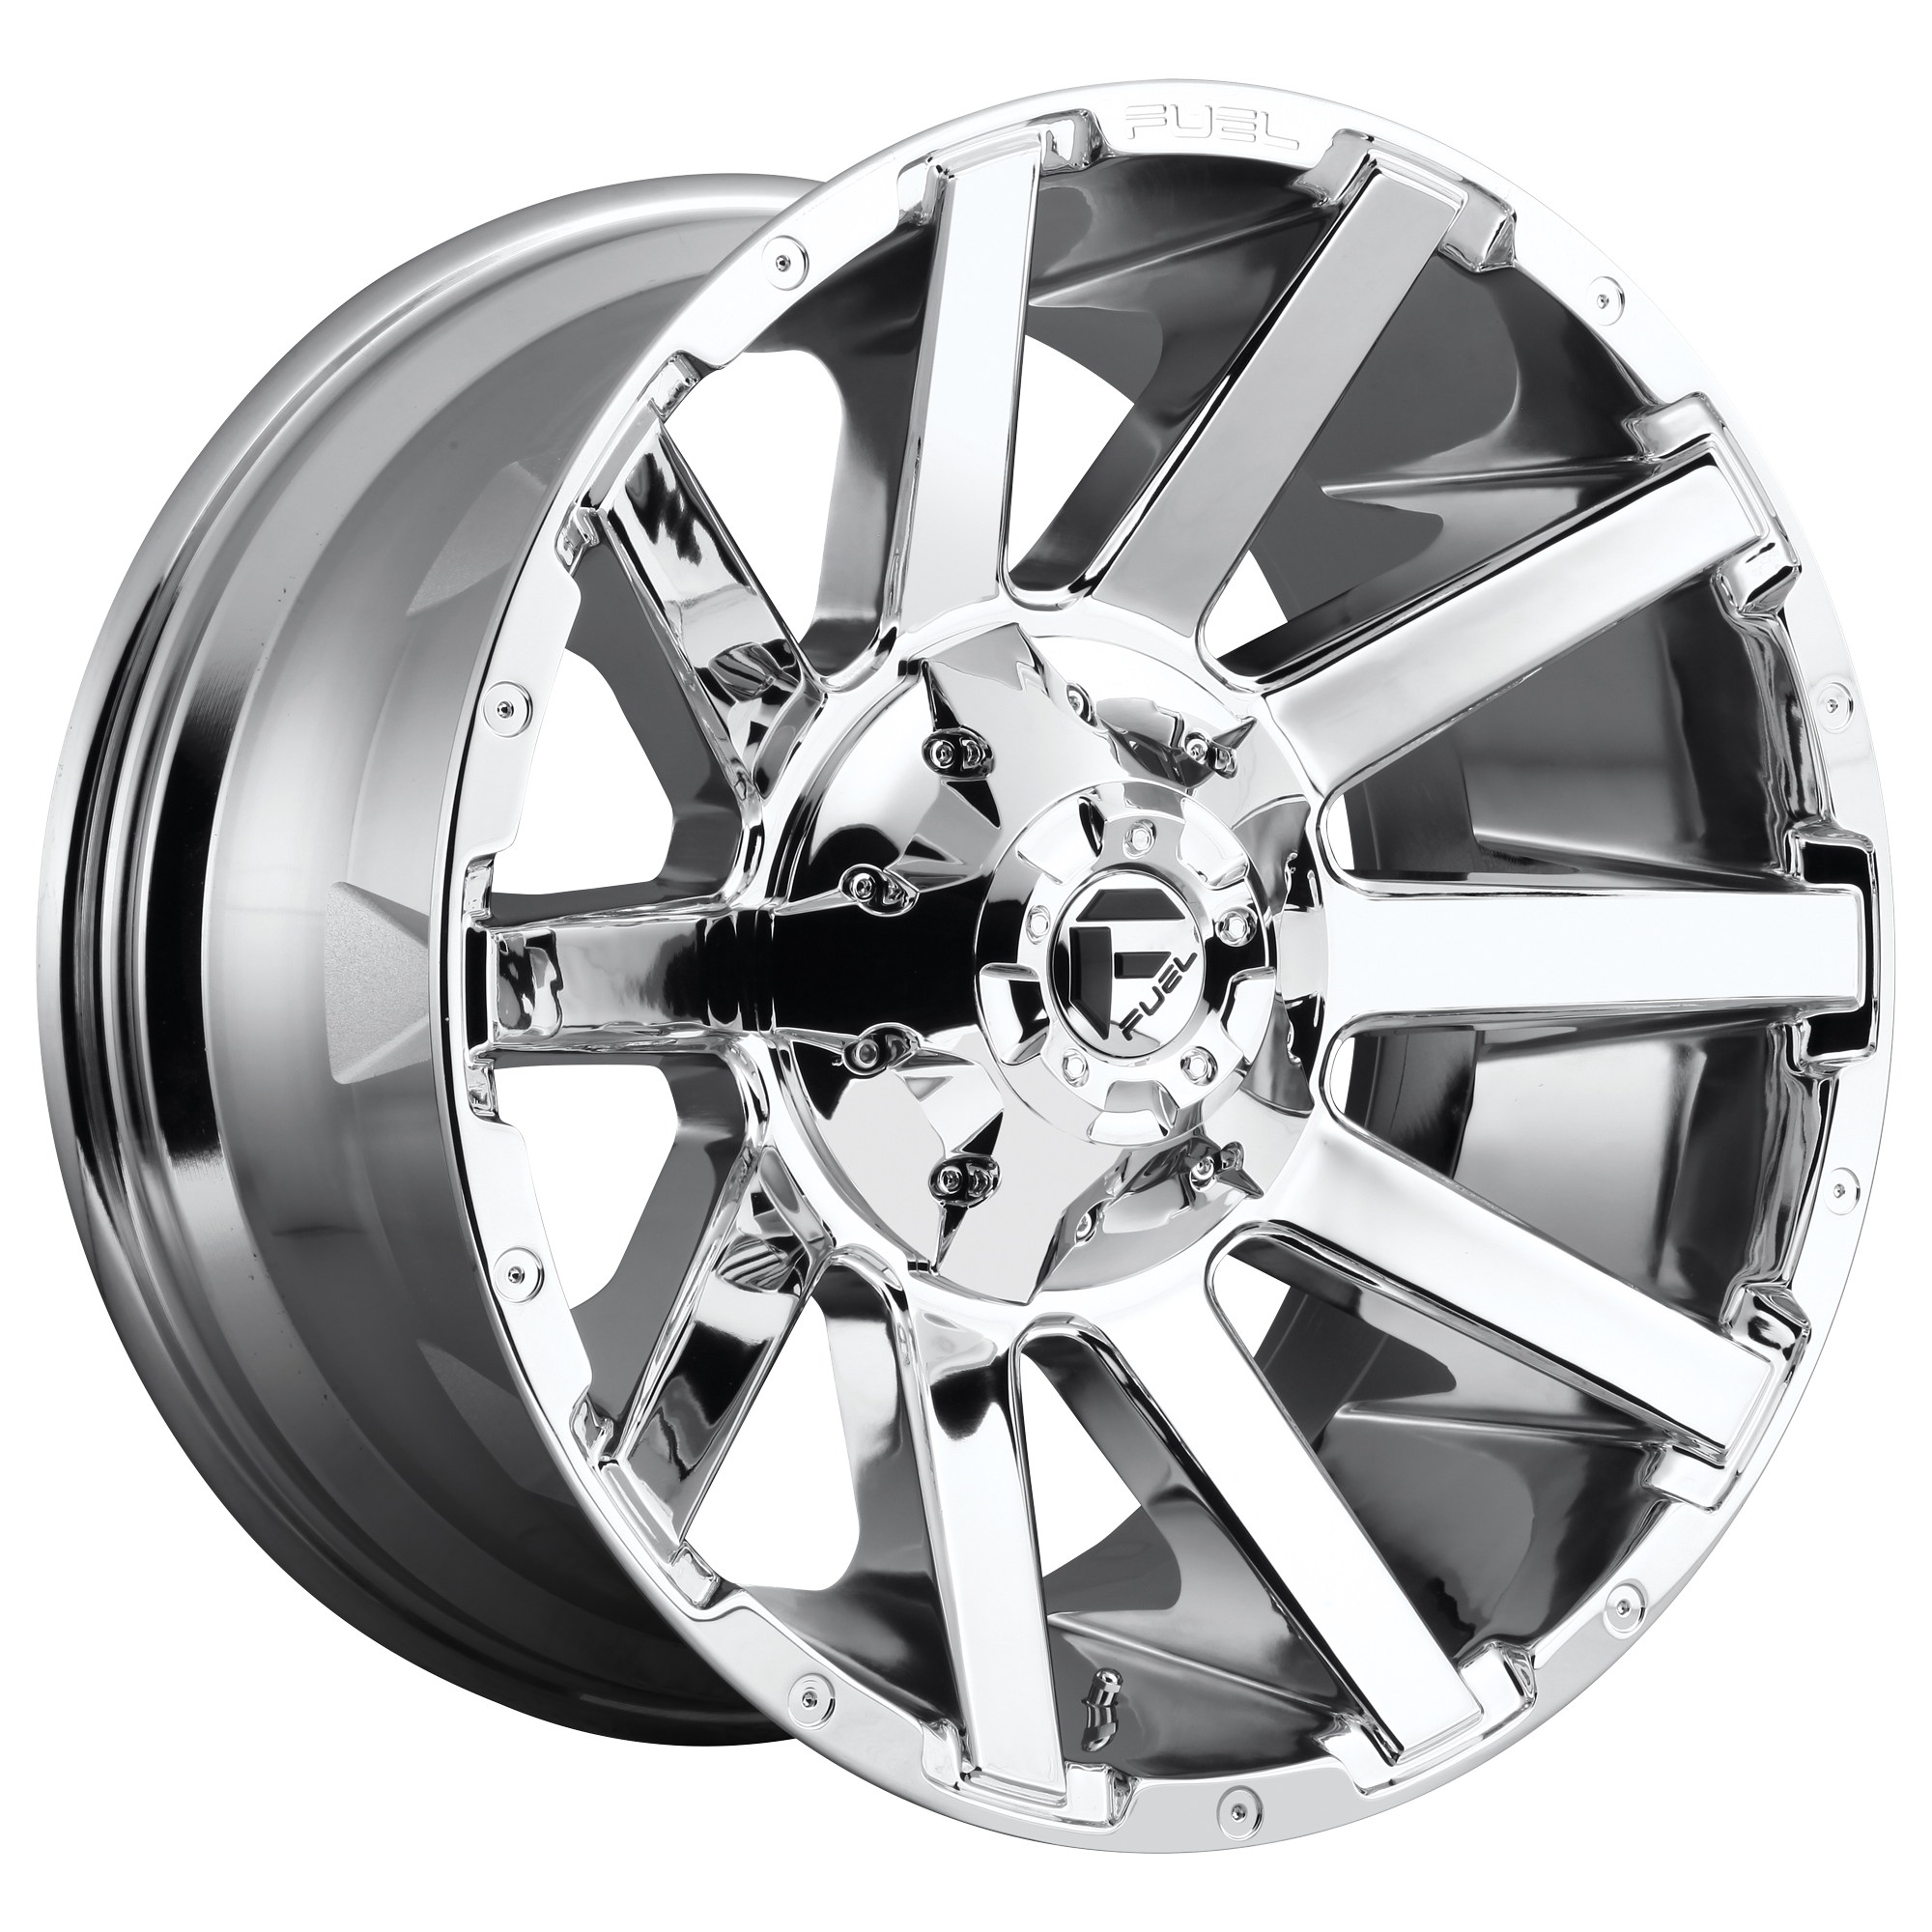 CONTRA 22x12 8x170.00 CHROME PLATED (-44 mm) - Tires and Engine Performance